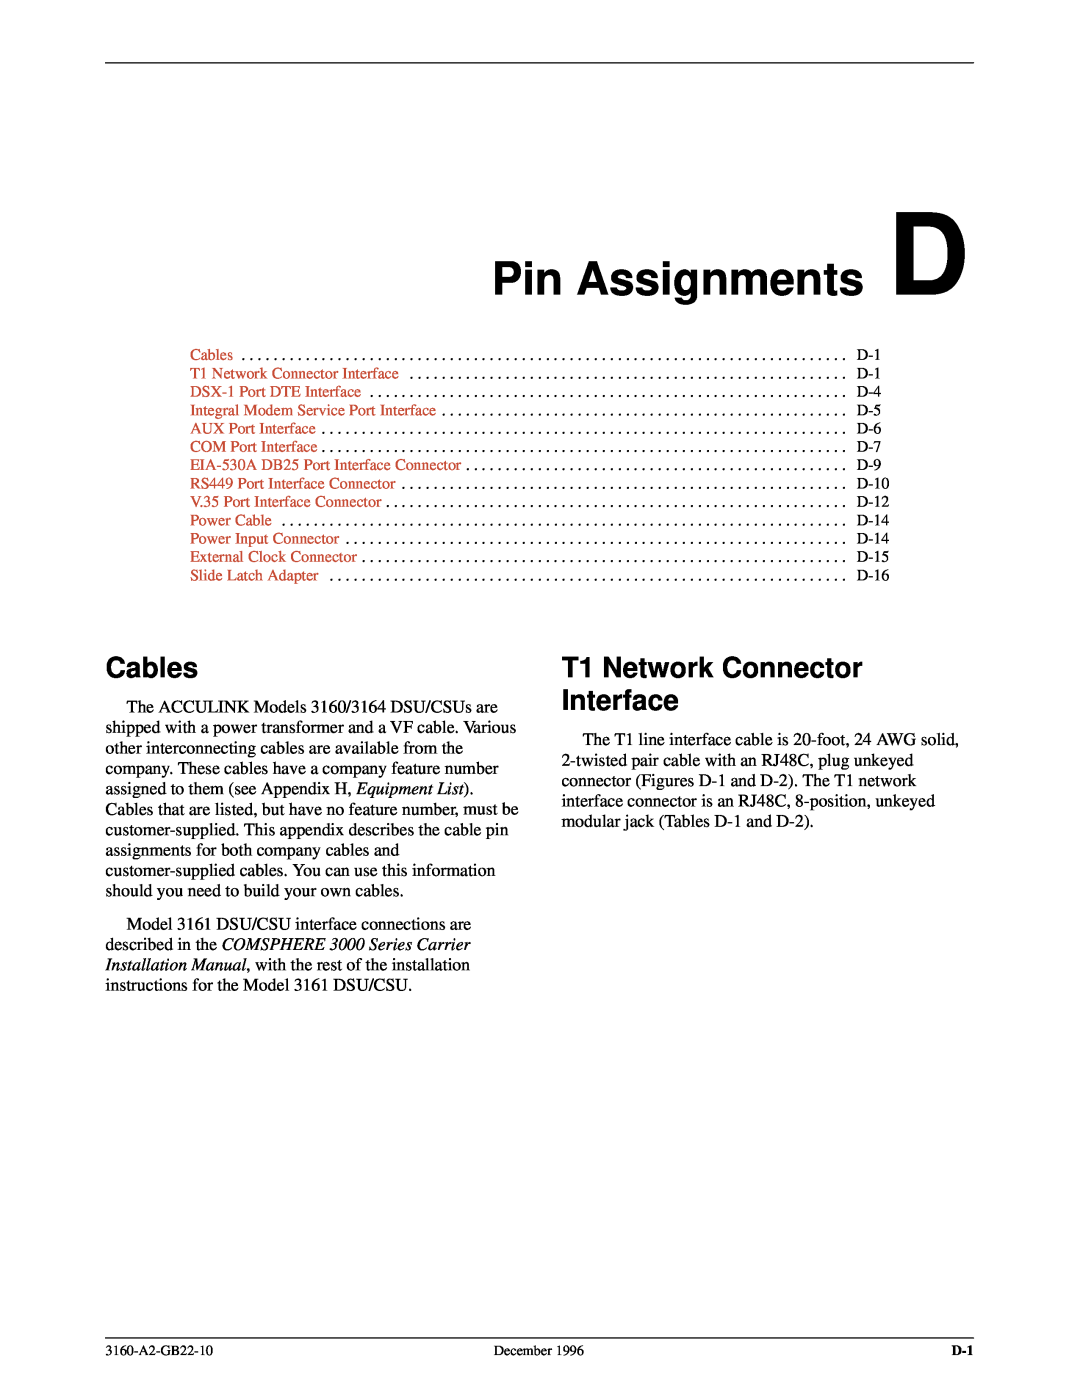 Paradyne 316x manual Pin Assignments D, Cables, T1 Network Connector Interface 